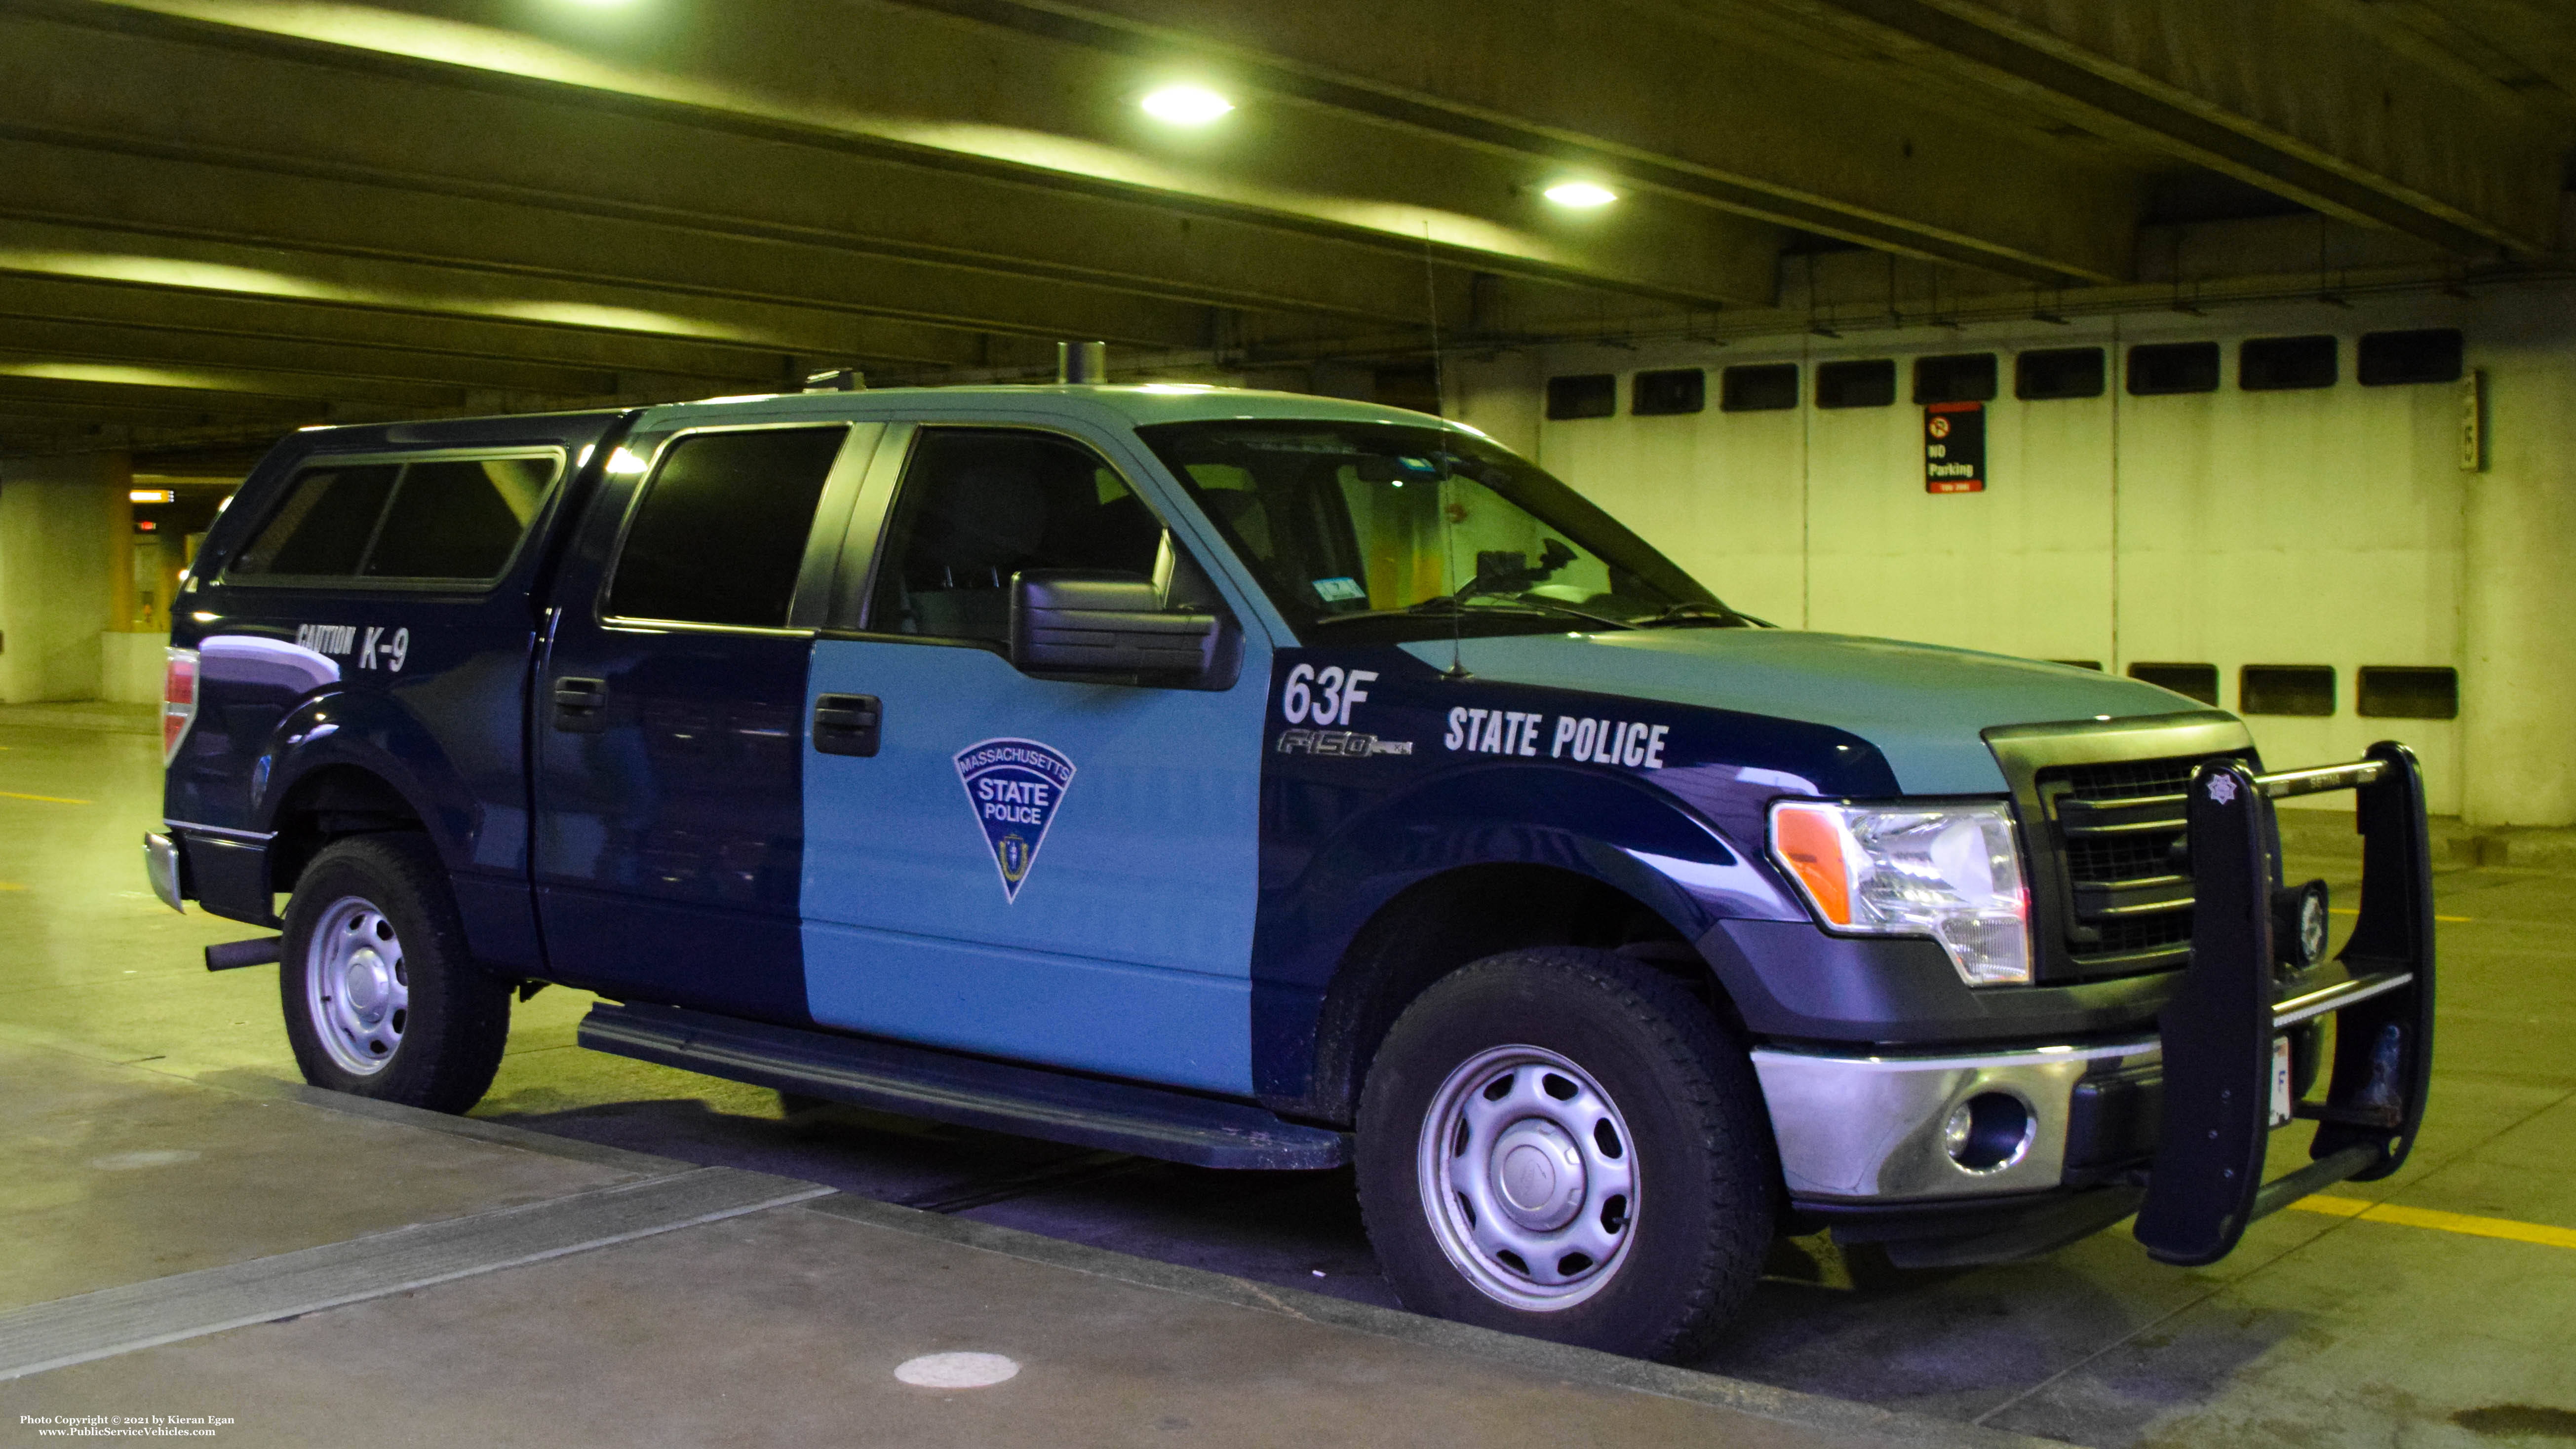 A photo  of Massachusetts State Police
            Cruiser 63F, a 2014 Ford F-150 Crew Cab             taken by Kieran Egan